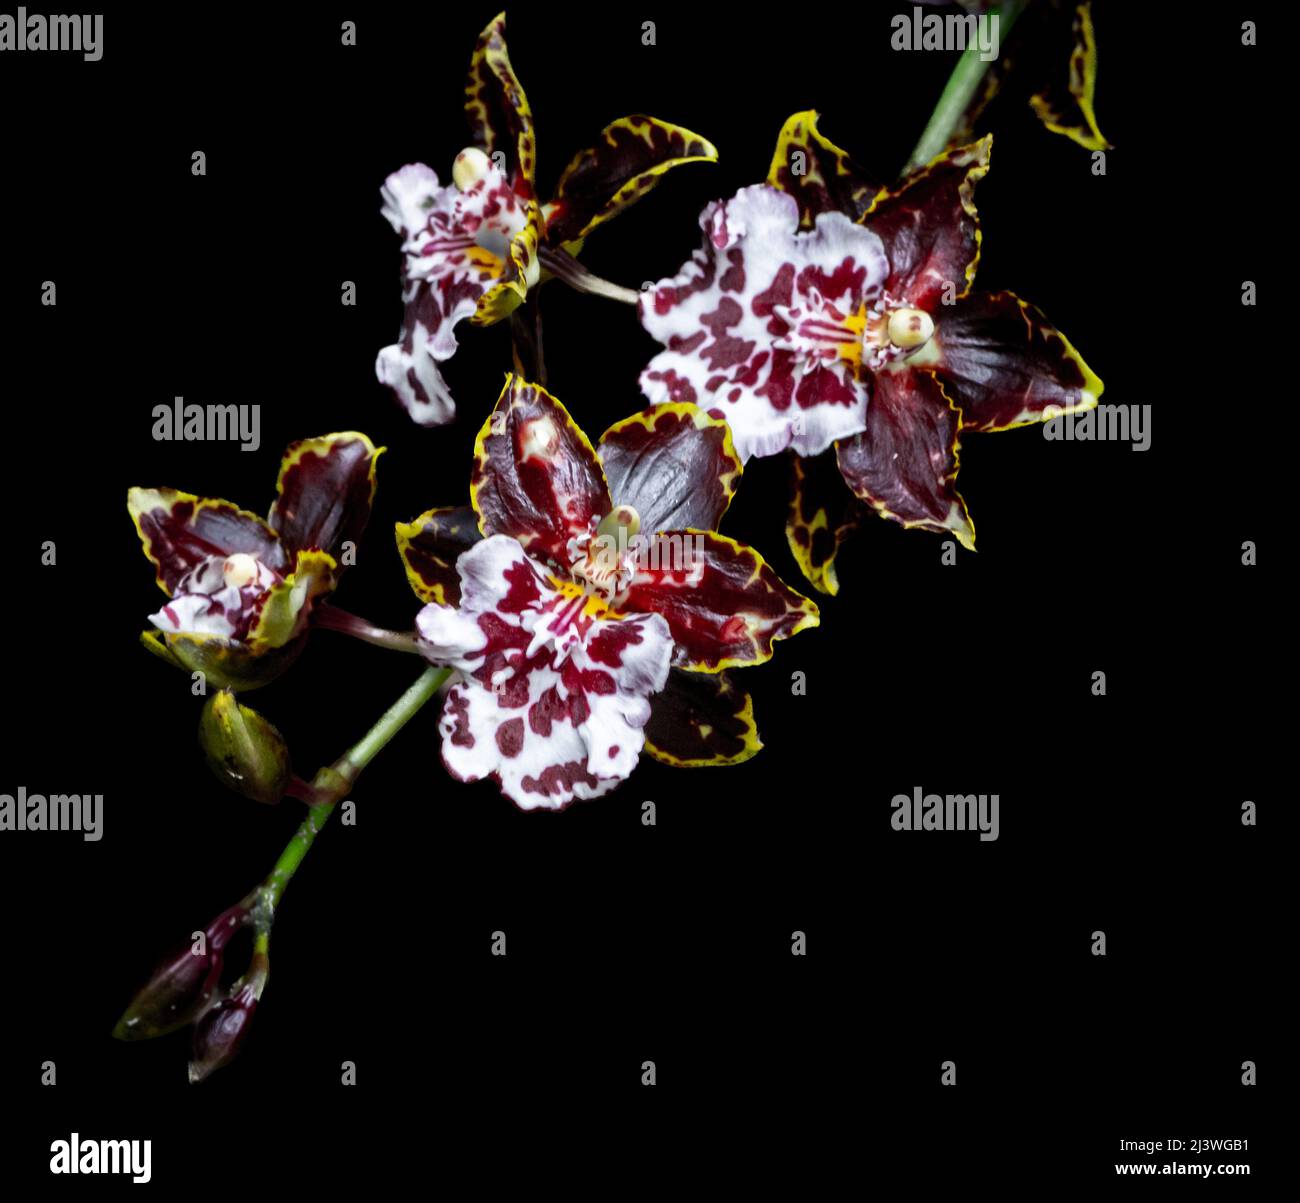 Beallara Tahoma Glacier orchid. orchid in the foreground and black background. Orchid on black background. Stock Photo